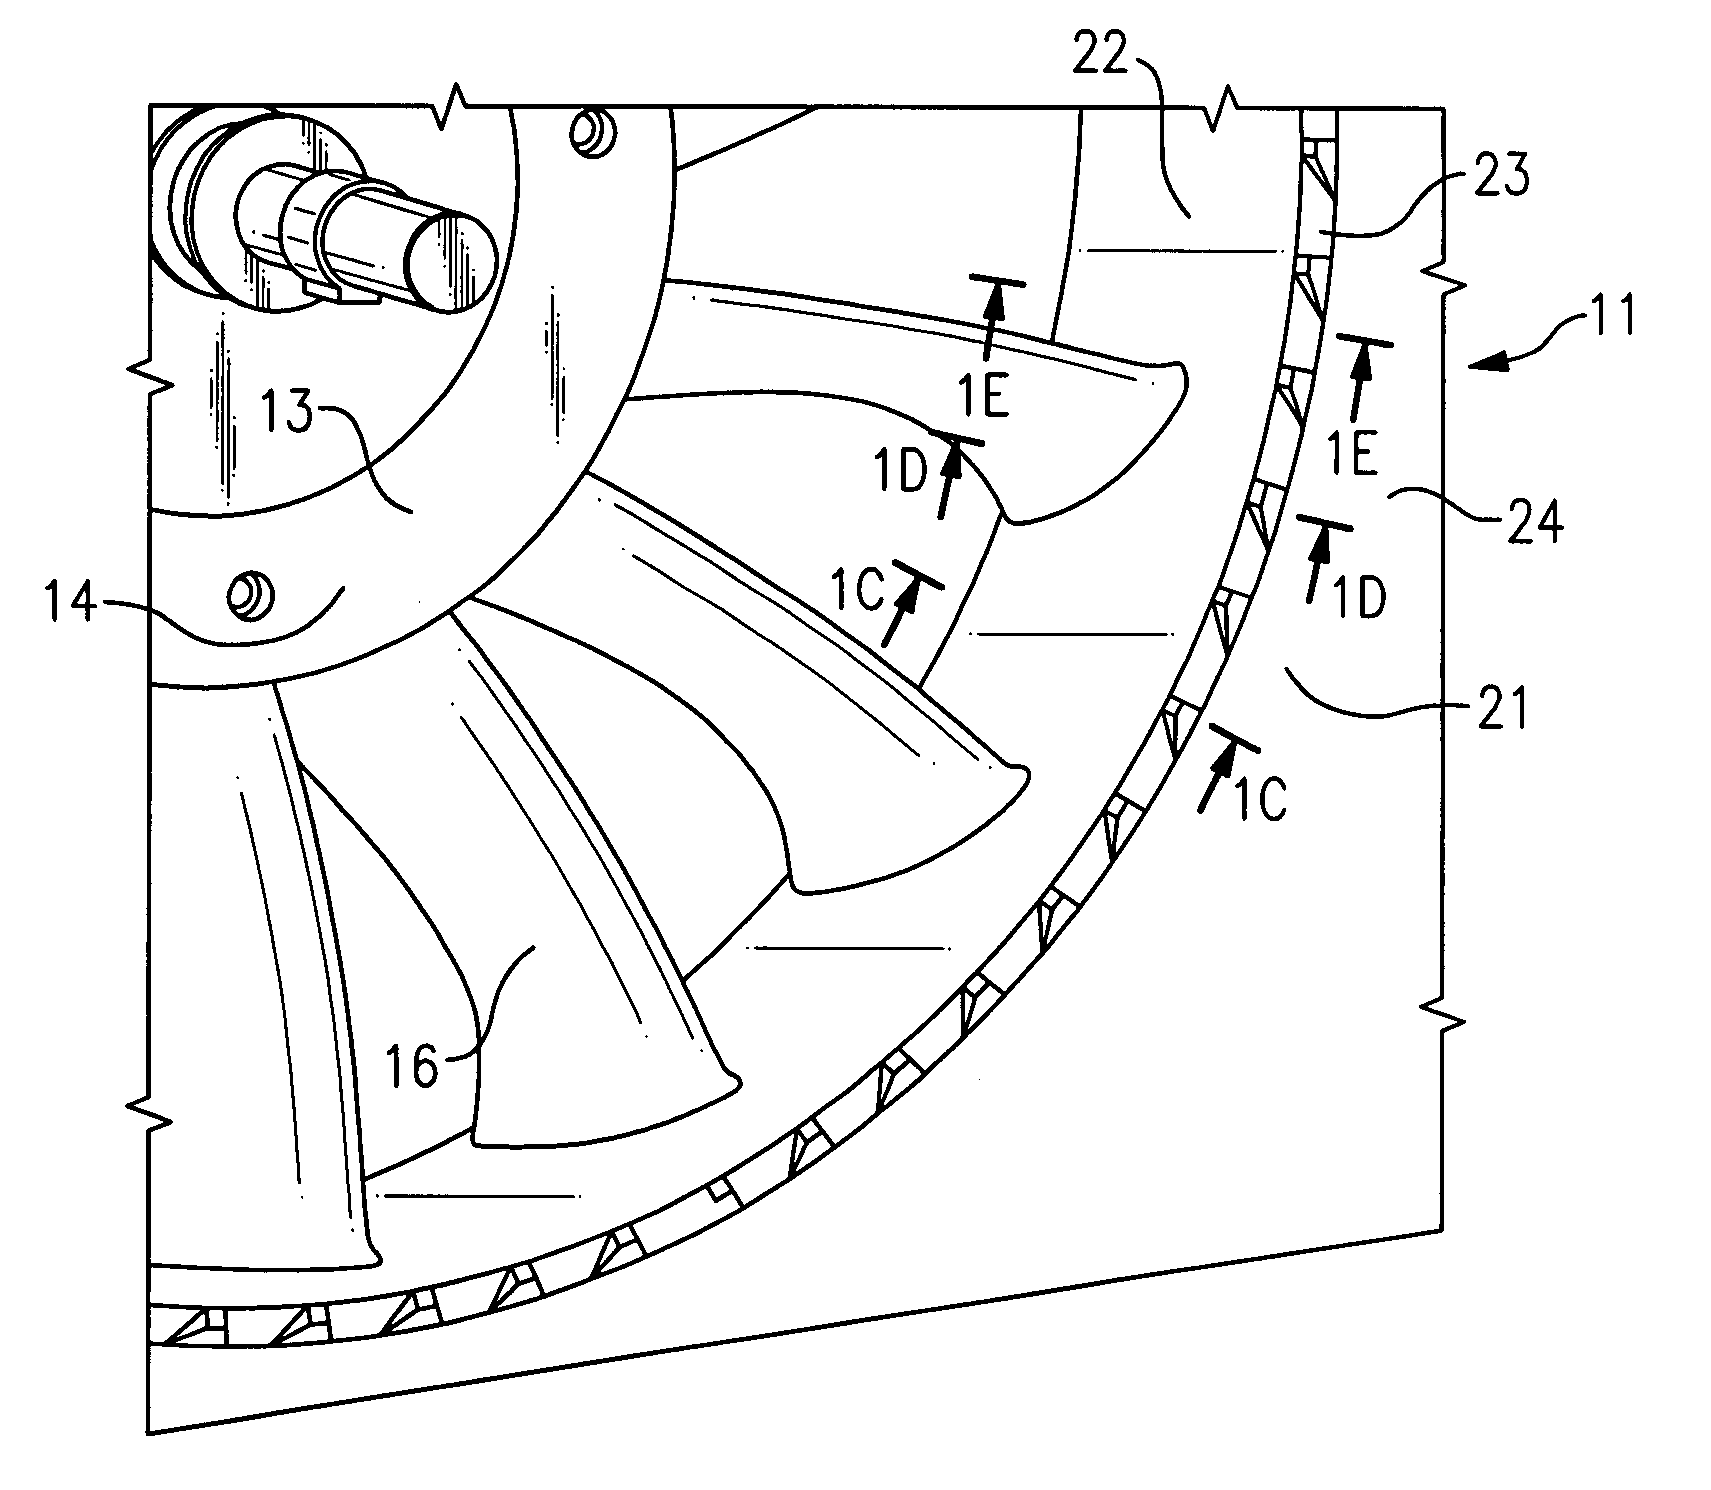 Axial fan casing design with circumferentially spaced wedges